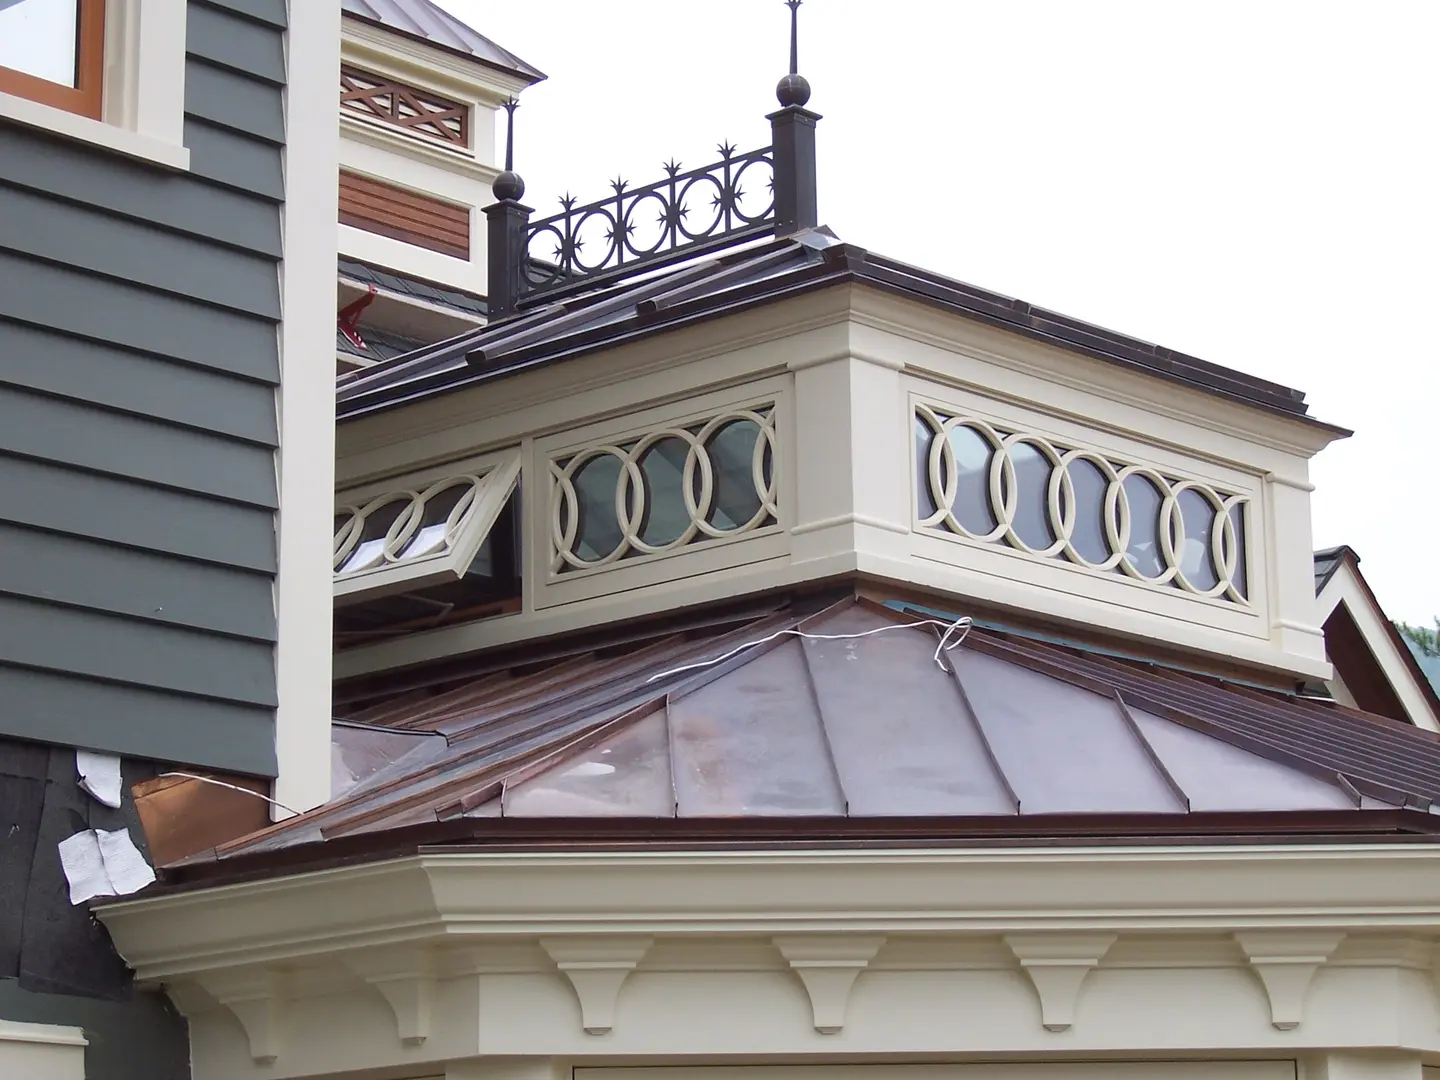 A close up of the corner of a building with a metal roof.